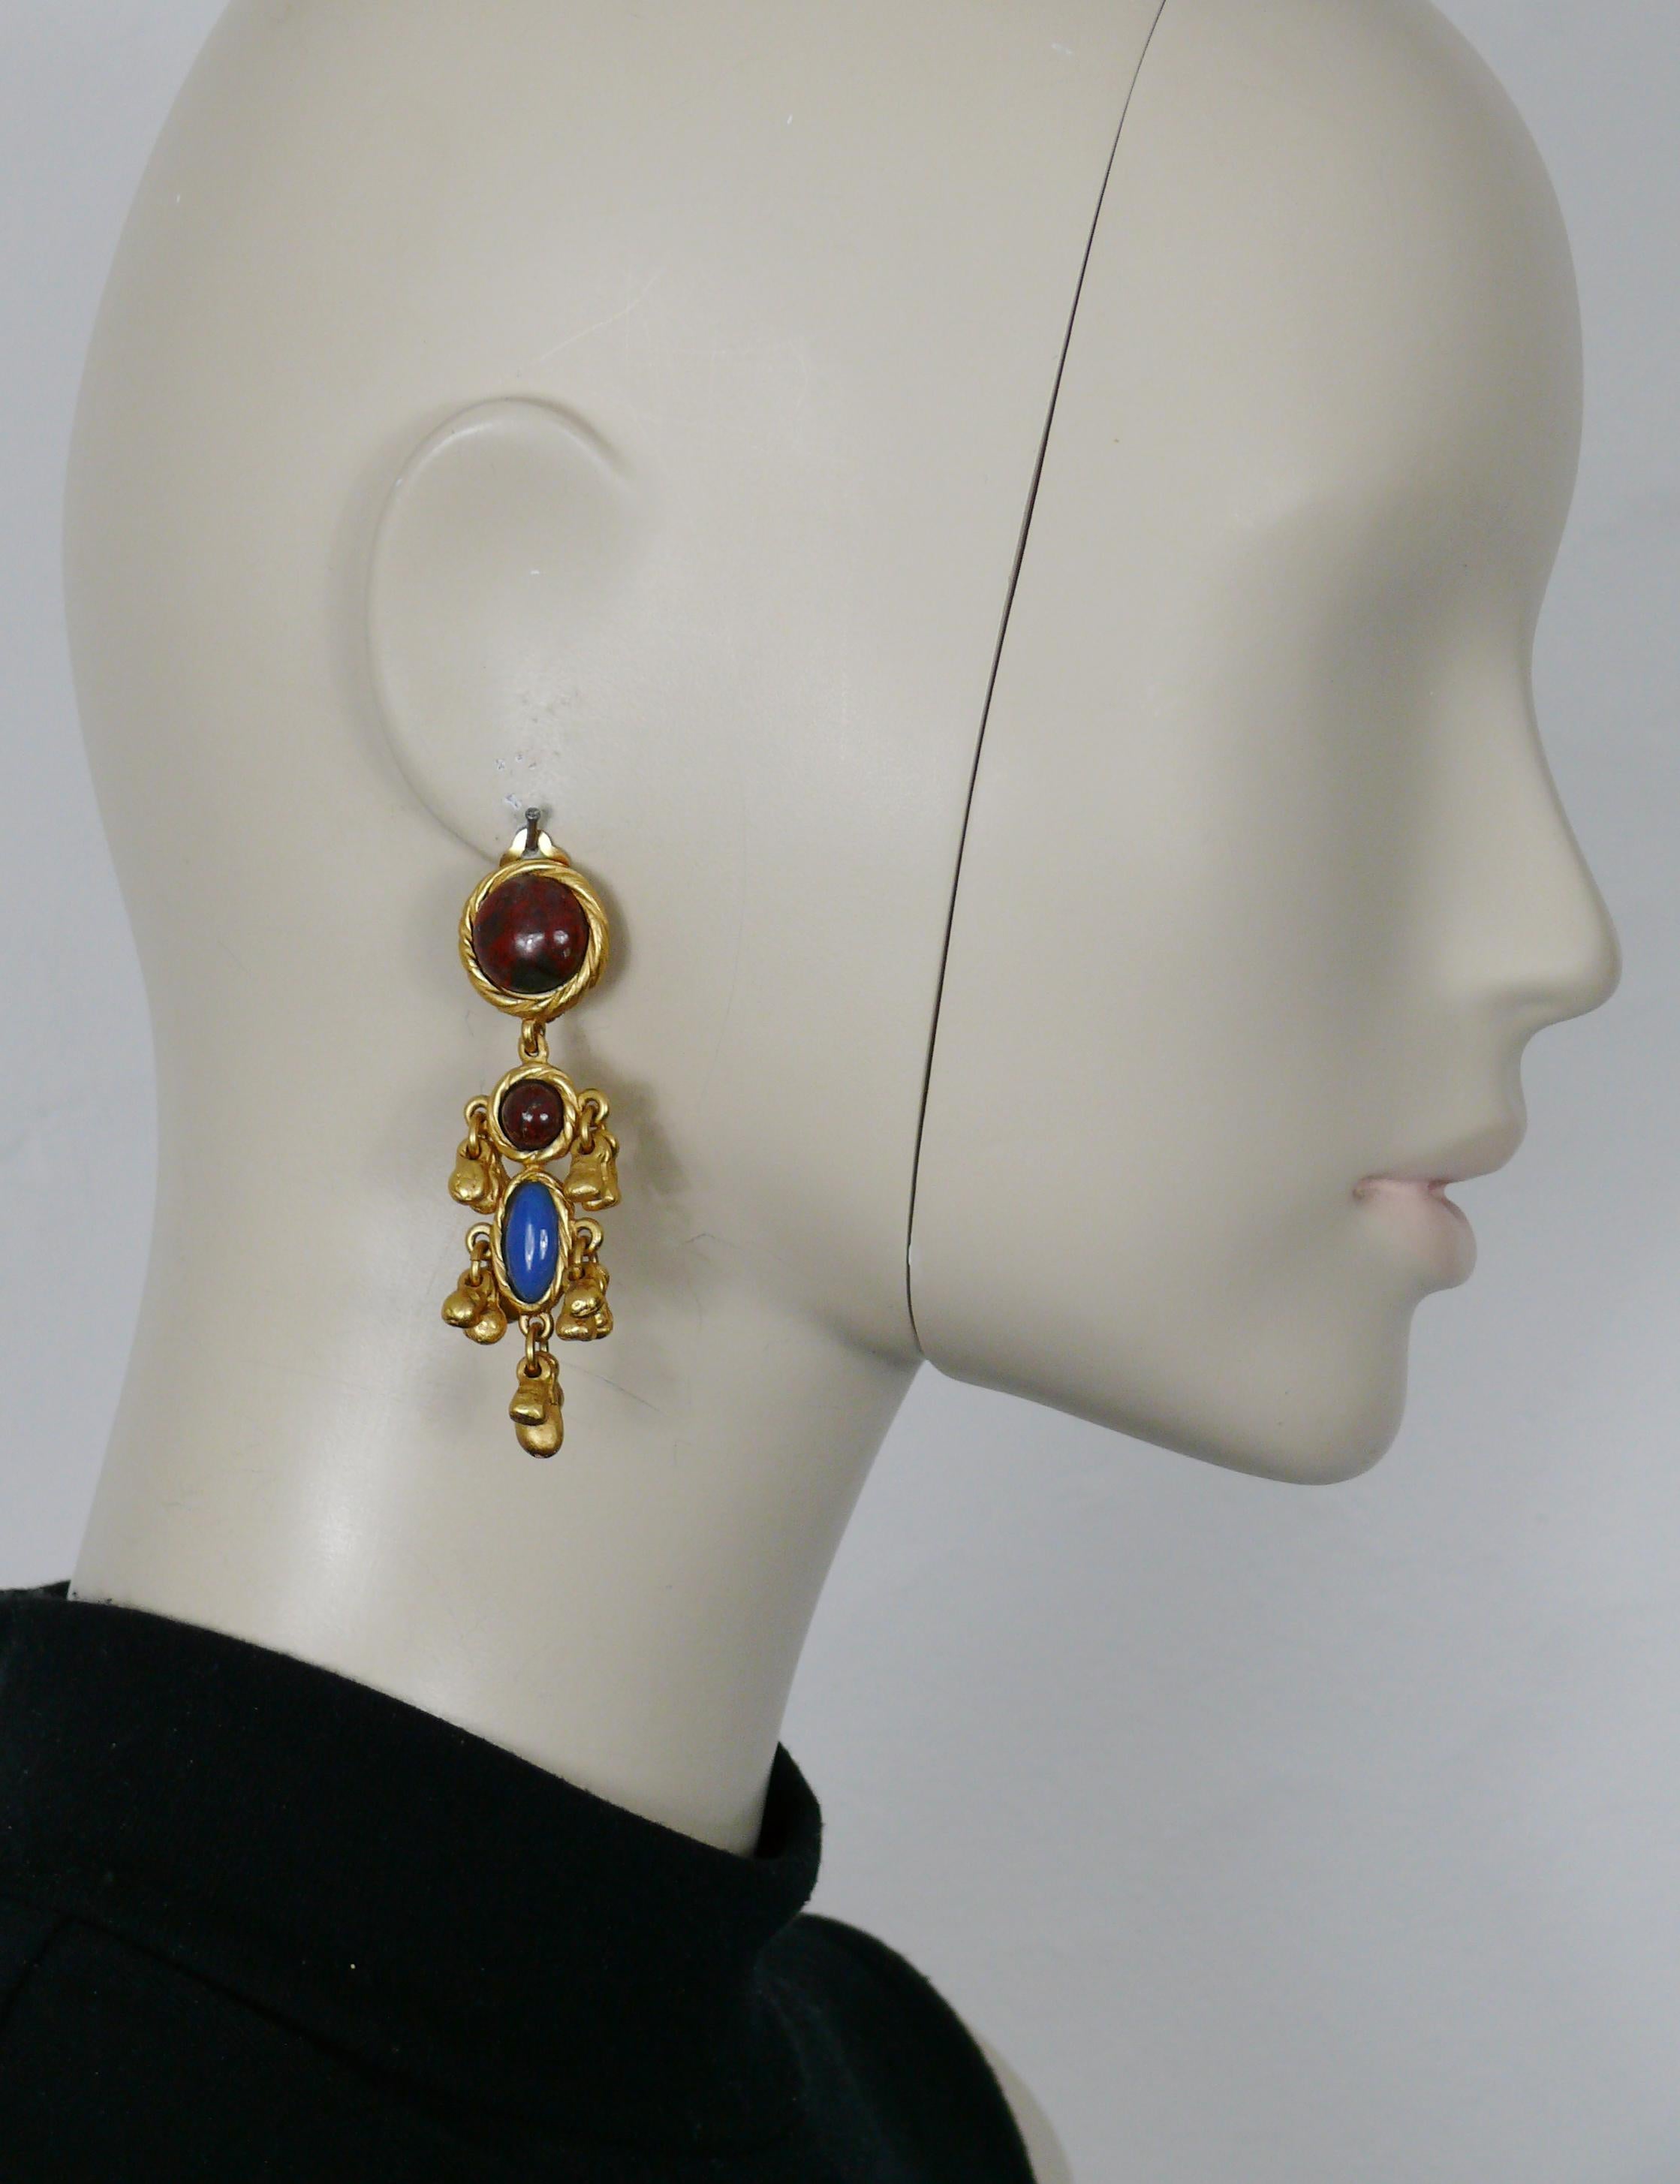 YVES SAINT LAURENT vintage gold tone dangling earrings (clip-on) embellished with faux stones glass cabochons and gilt charms.

Embossed YSL Made in France.

Indicative measurements : max. height approx. 6.9 cm (2.72 inches) / max. diameter approx.